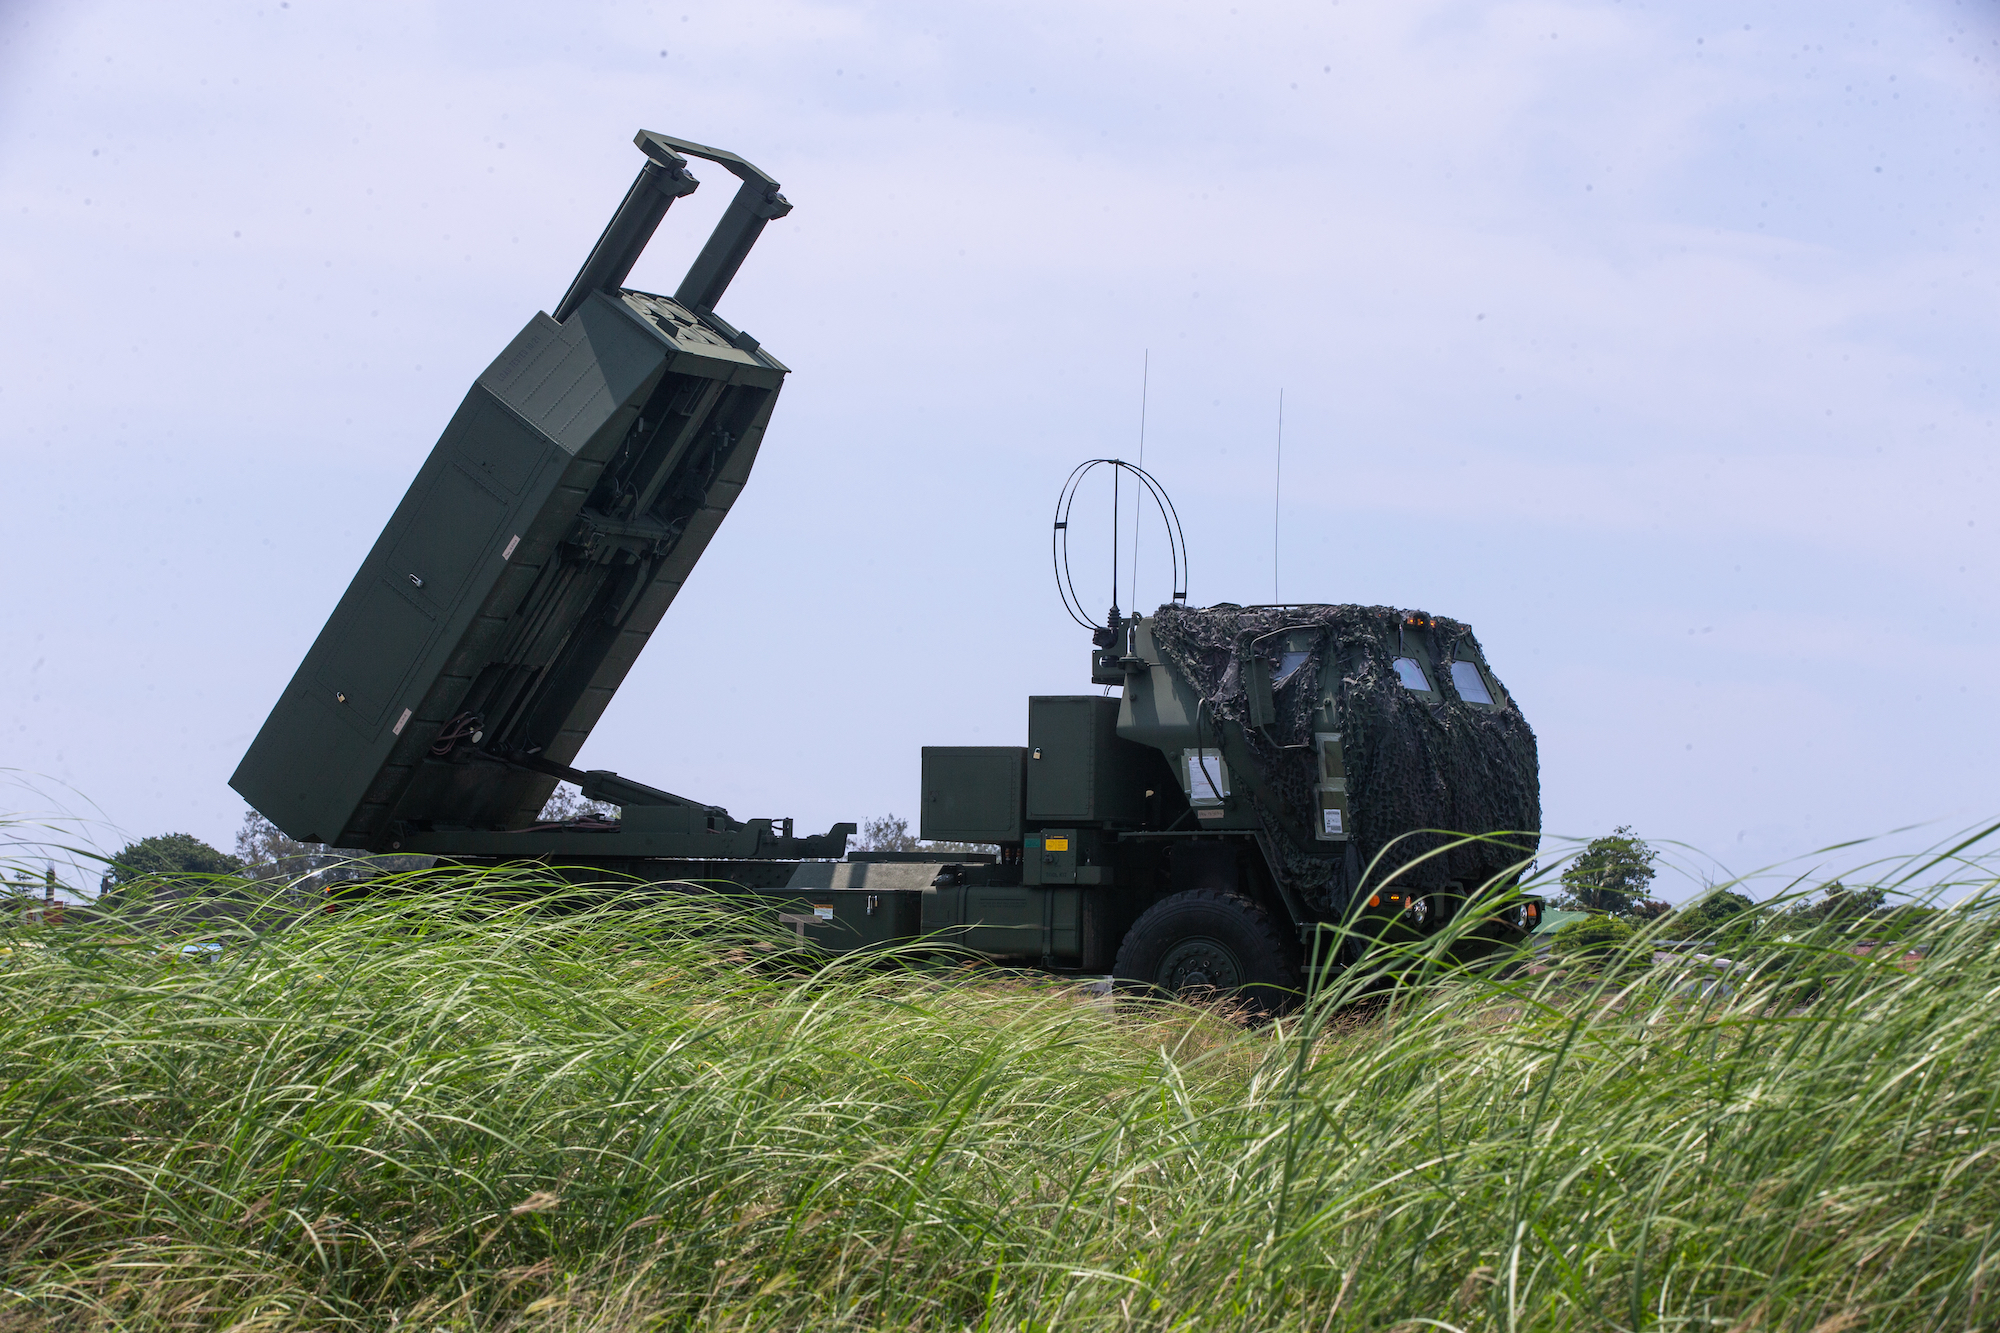 The US’s latest assist to Ukraine: Rocket launchers with a 43-mile range